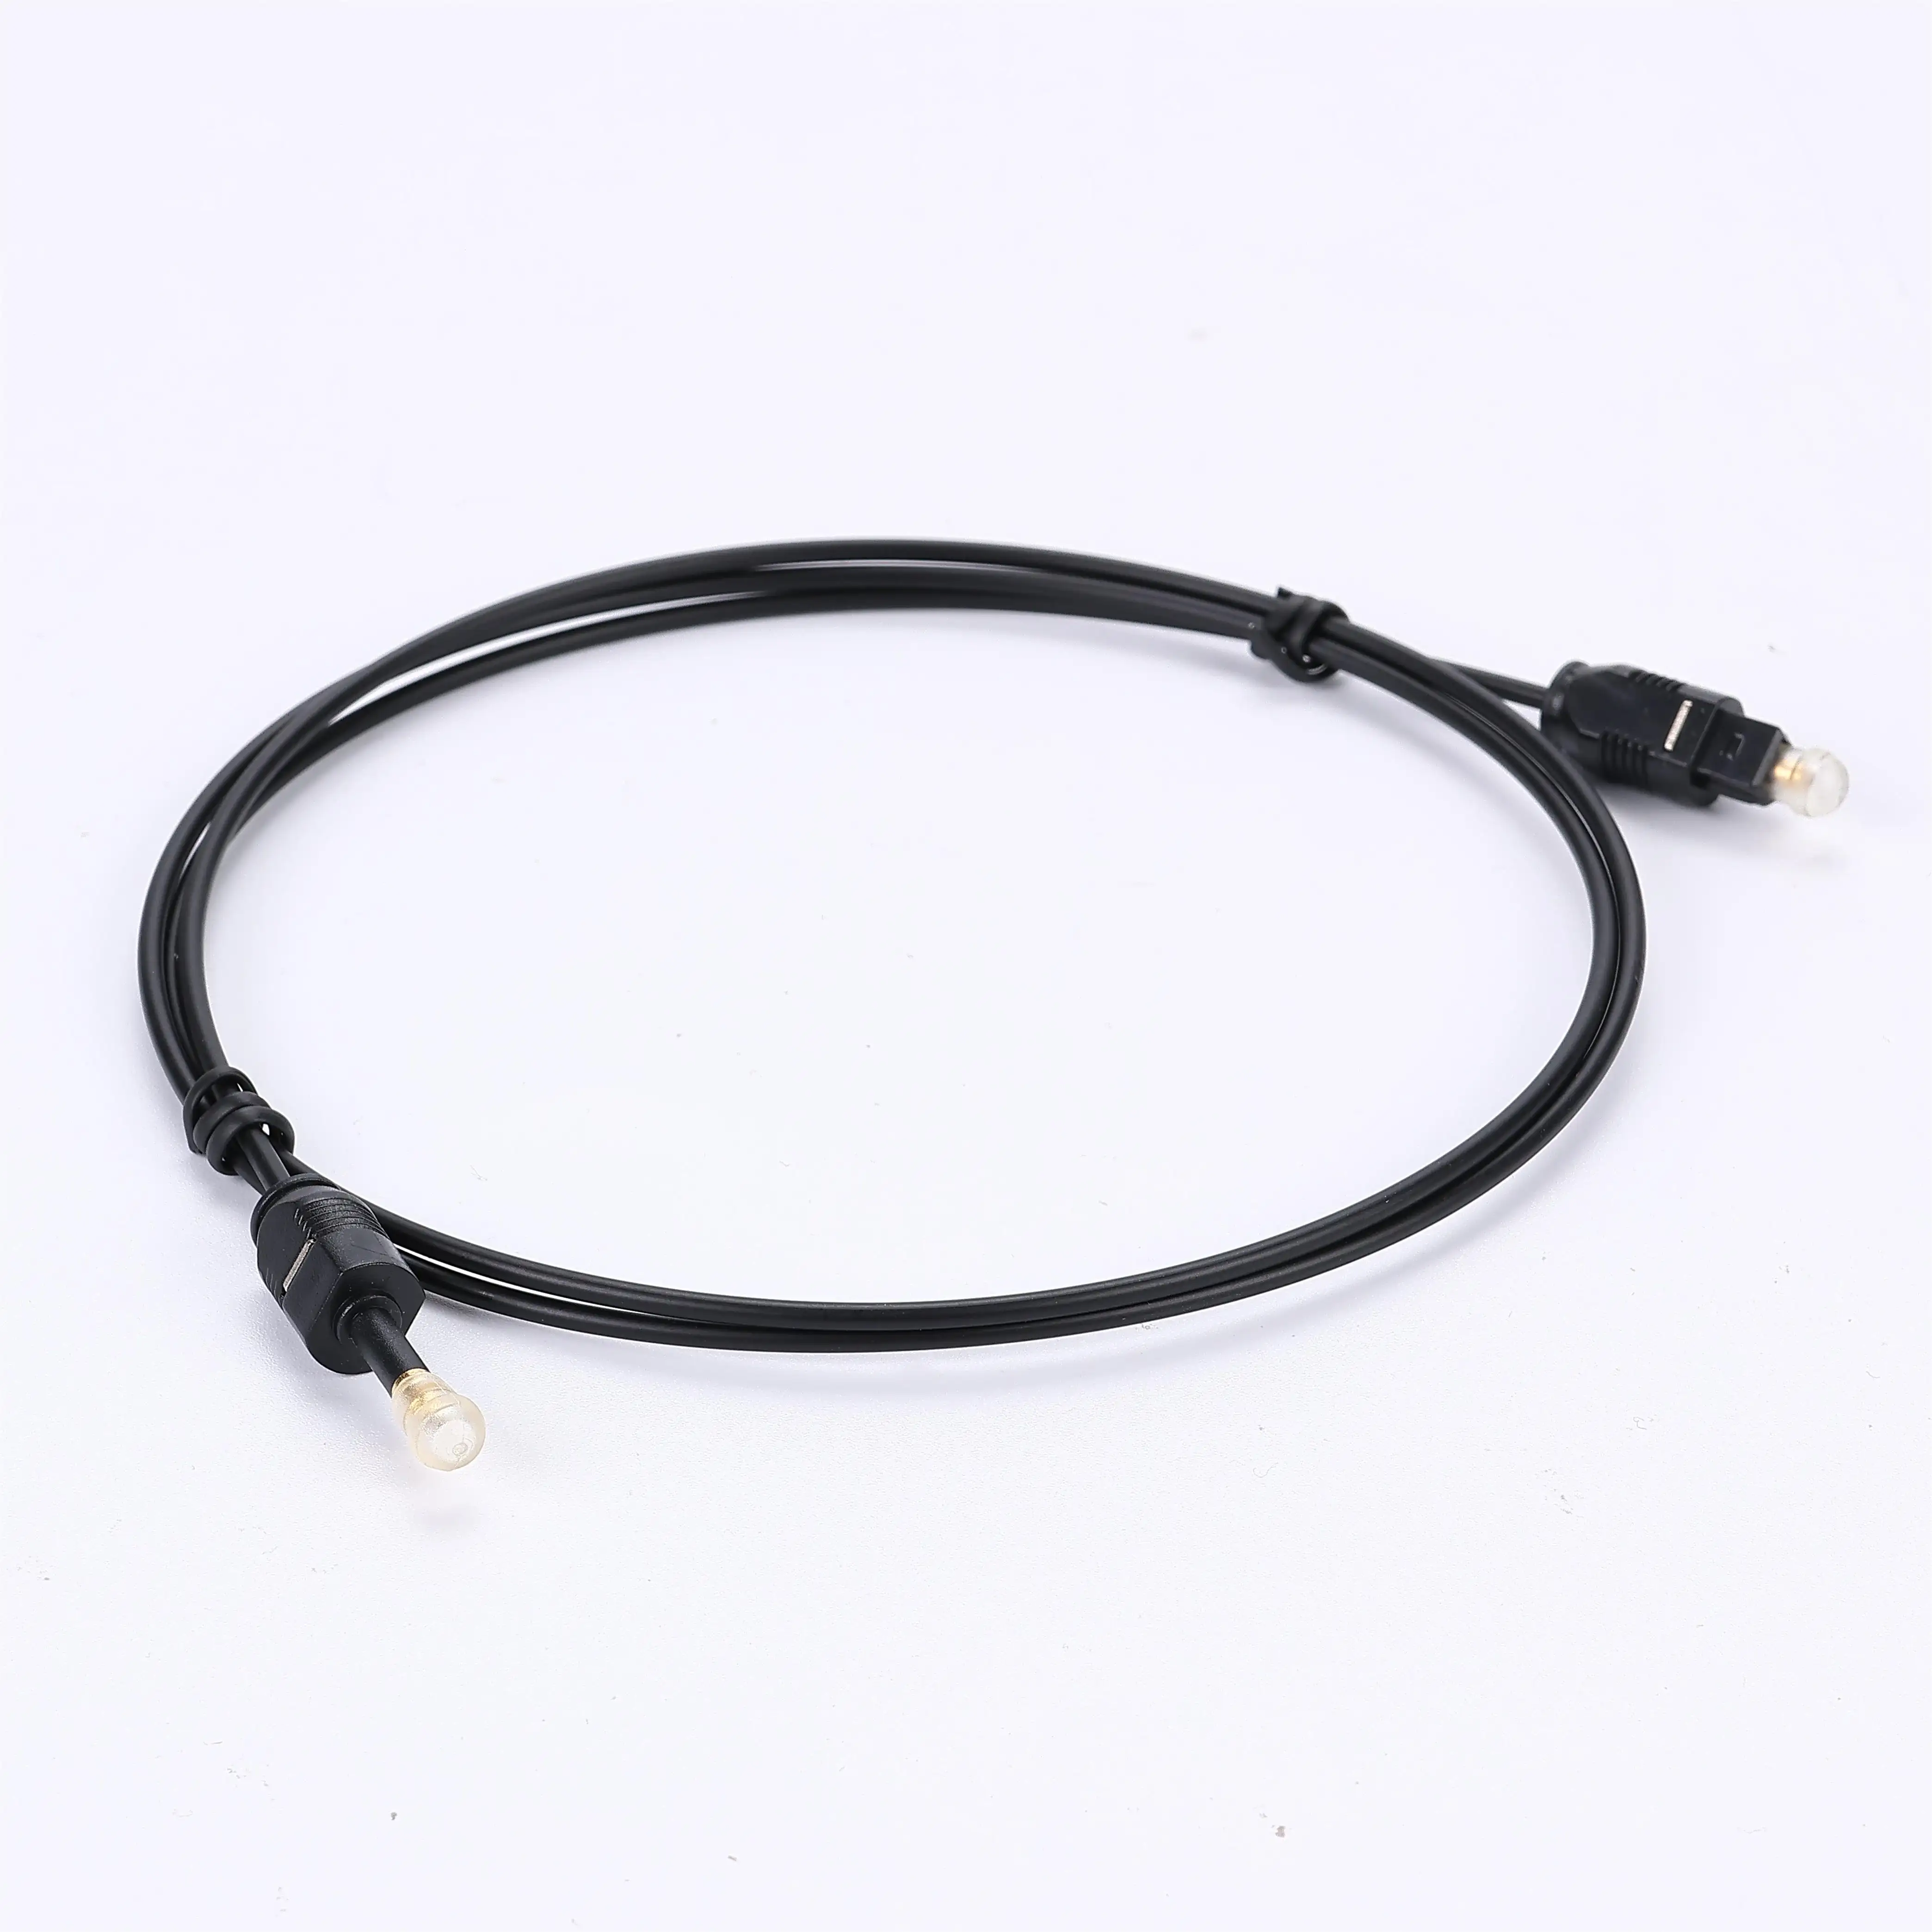 Digital Optical Fiber Toslink TX-TP016 Audio Cable for Speaker Amplifiers DVD CD Players TVs